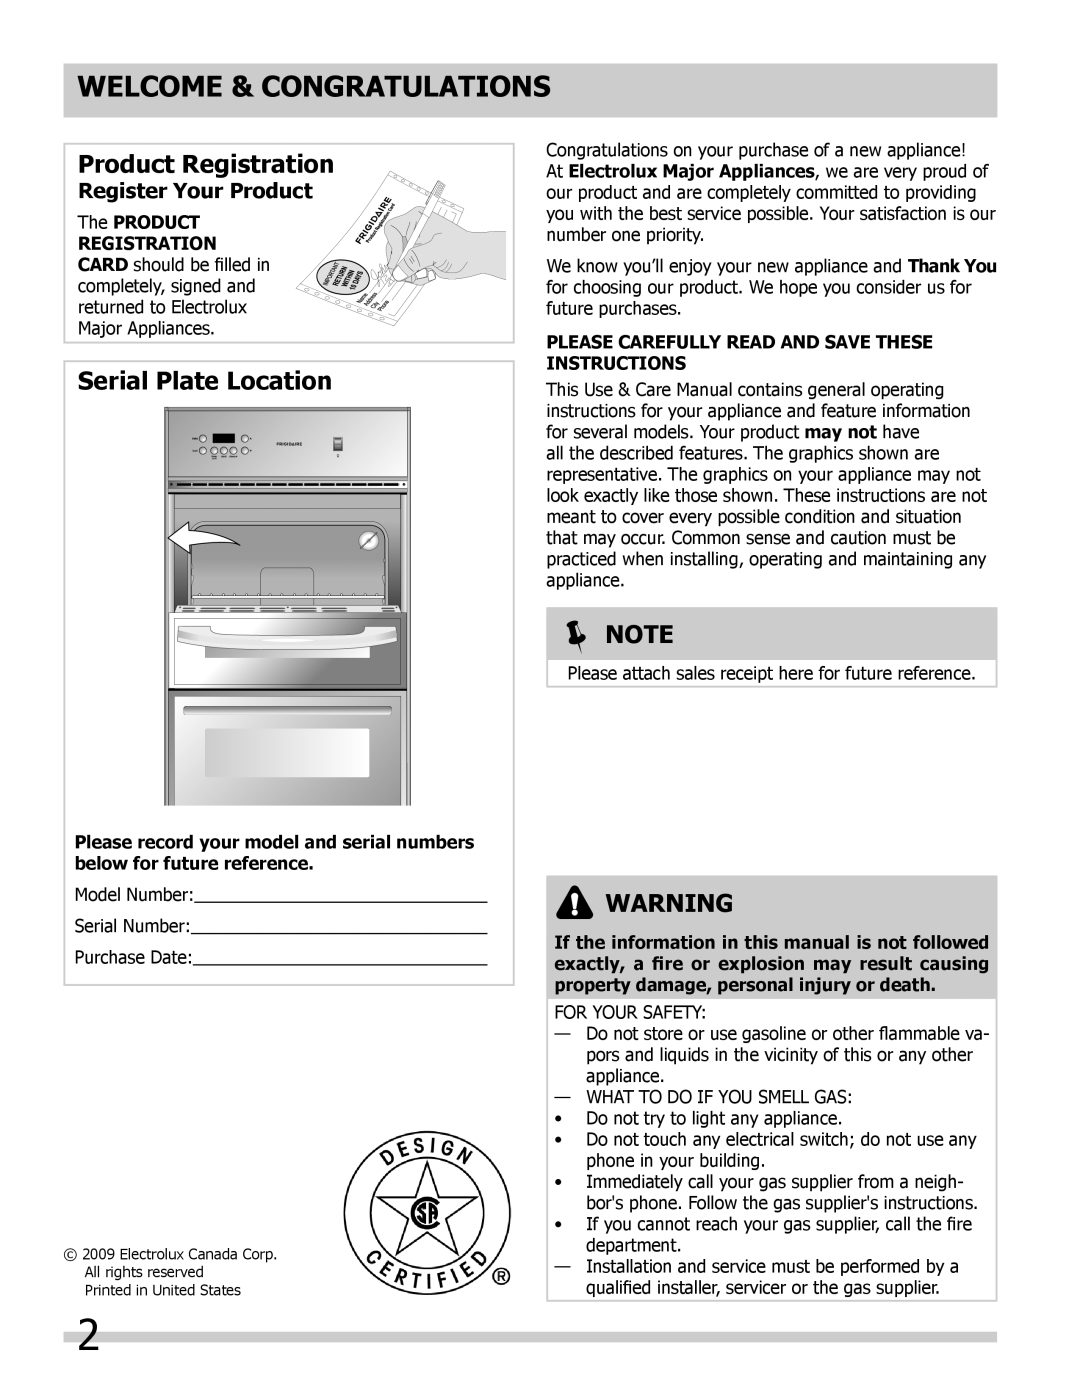 Frigidaire FGB24T3EB Welcome & Congratulations, Product Registration, Serial Plate Location, Note, Register Your Product 